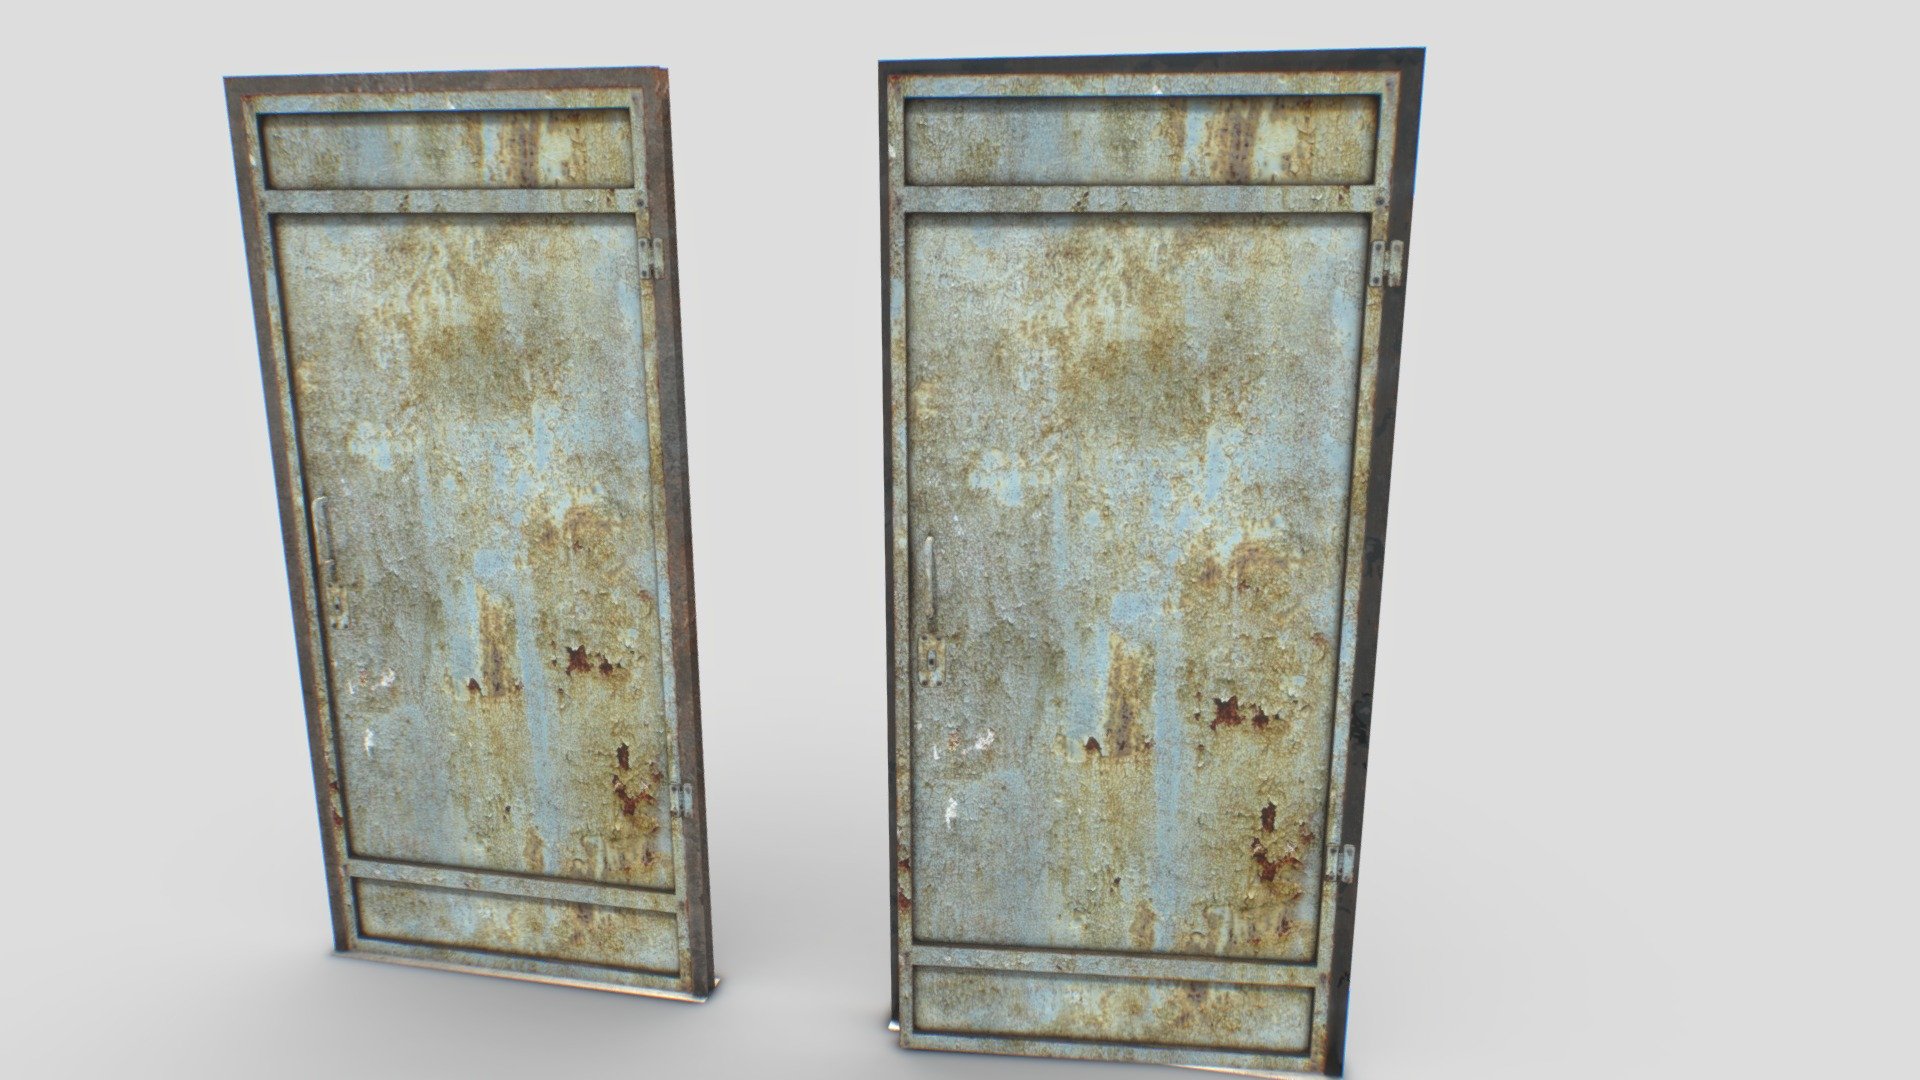 1 old metal door. Real scale. Comes with 4096x PBR textures including Albedo, Normal, Metalness, Smoothness, Roughness and AO.

Model comes with 2 different door frames.

Total polys 2700. 2500 verts 3d model